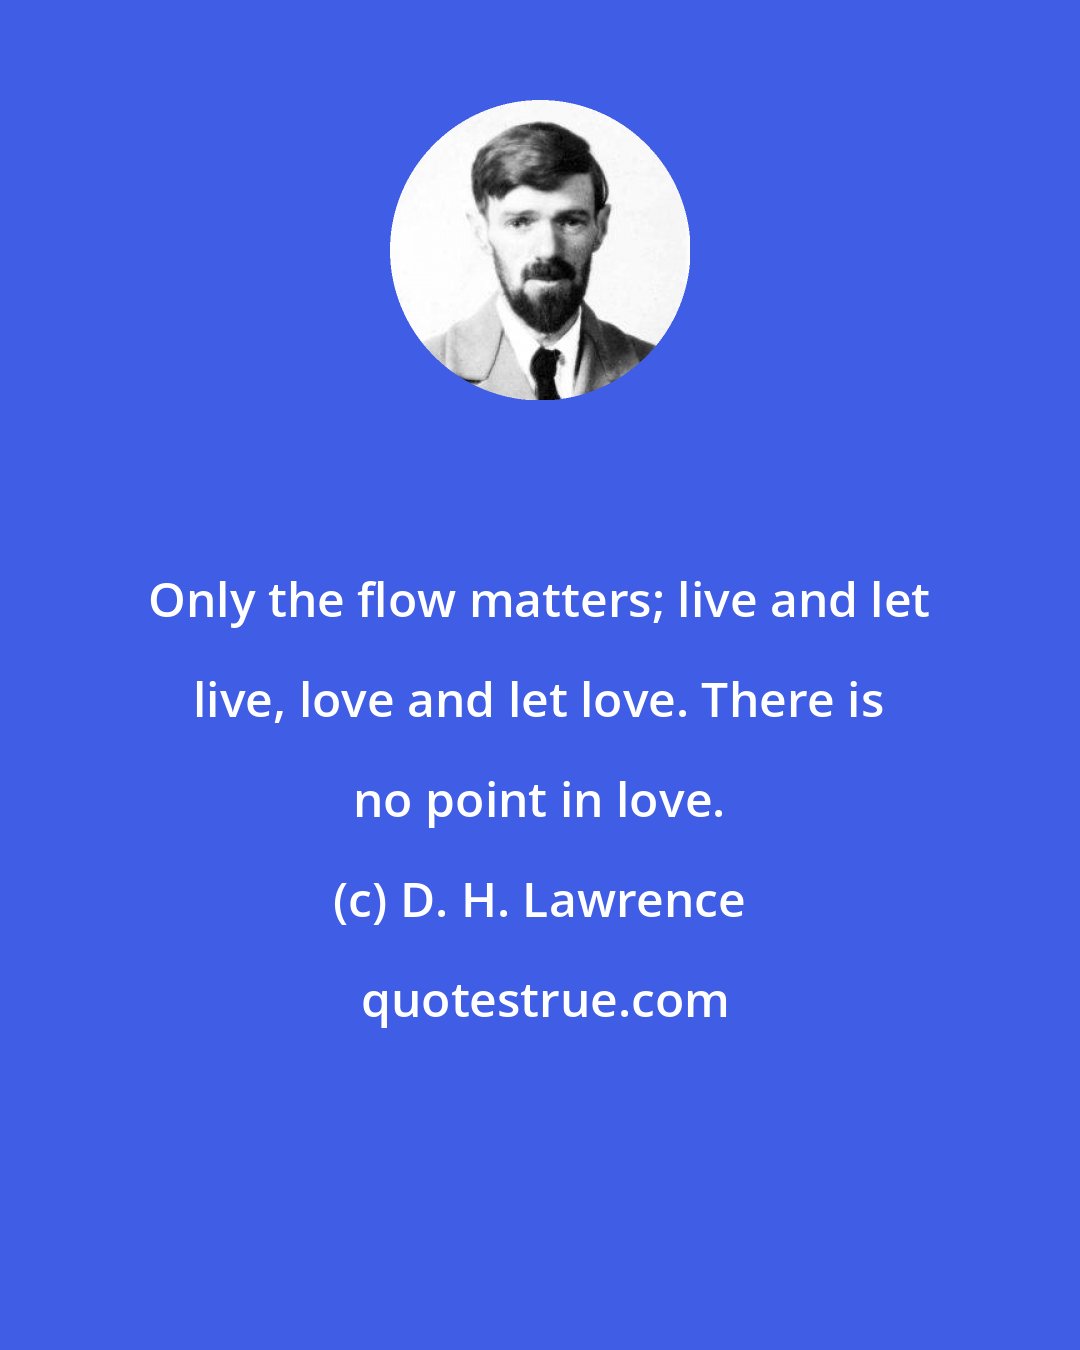 D. H. Lawrence: Only the flow matters; live and let live, love and let love. There is no point in love.